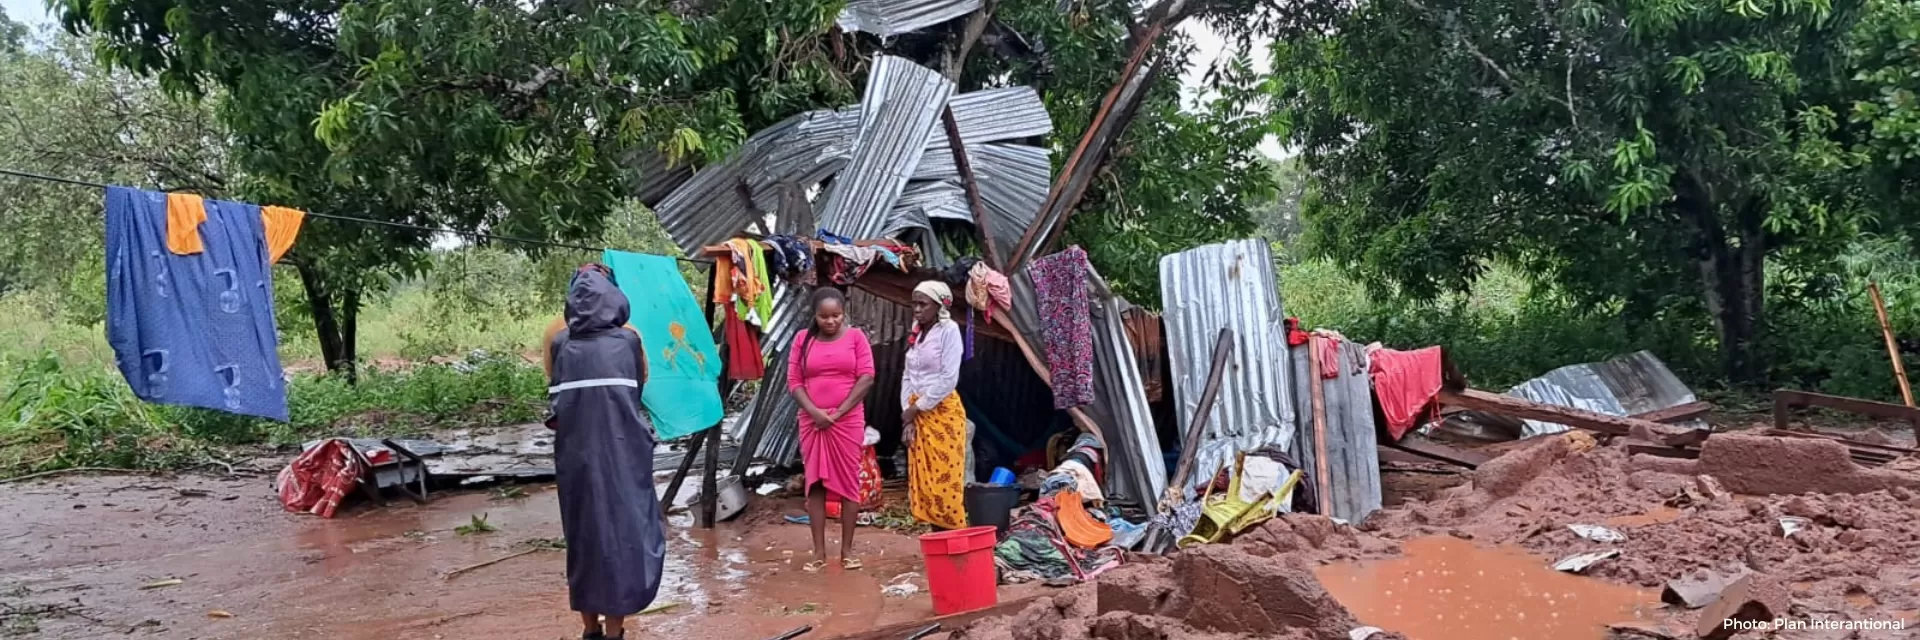 Damages in Mozambique